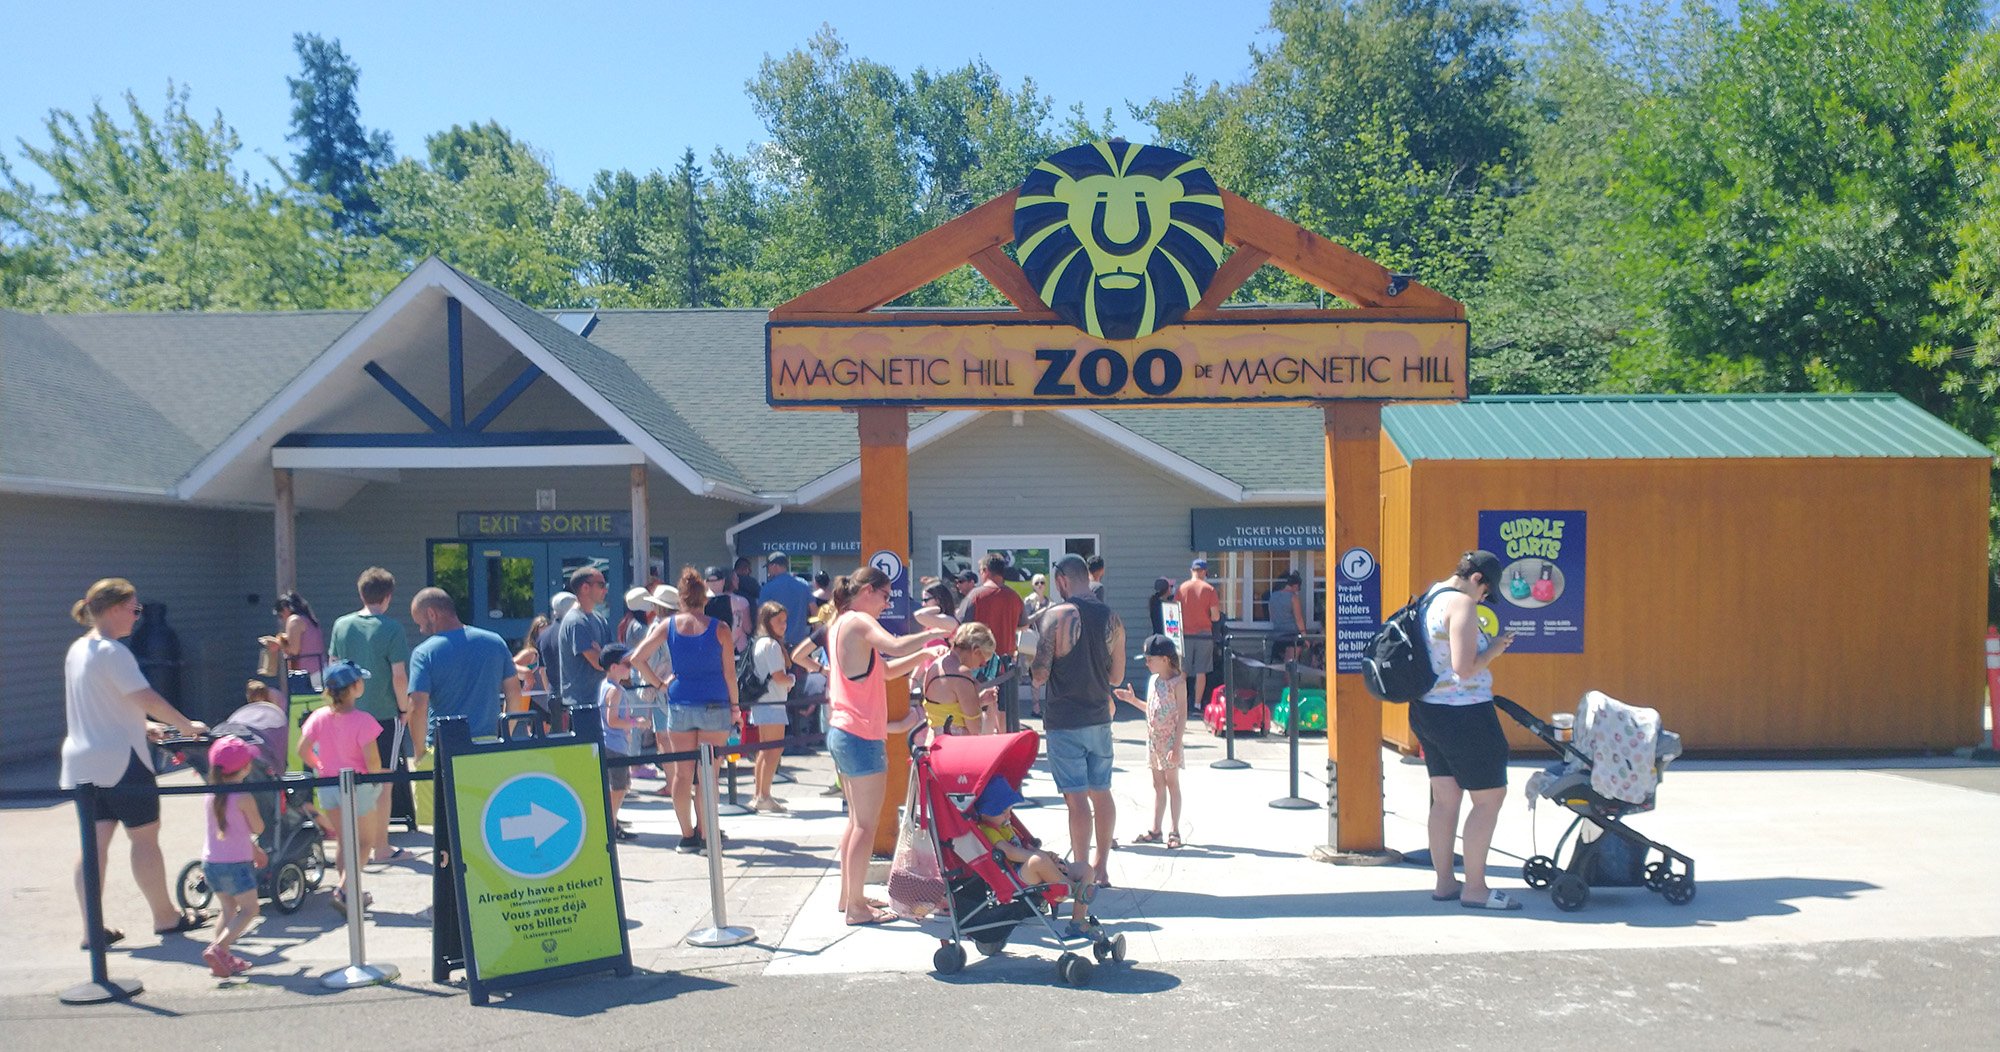 Also the Moncton Zoo is here. Look at these animals dying of thirst, waiting in line. Cruel.